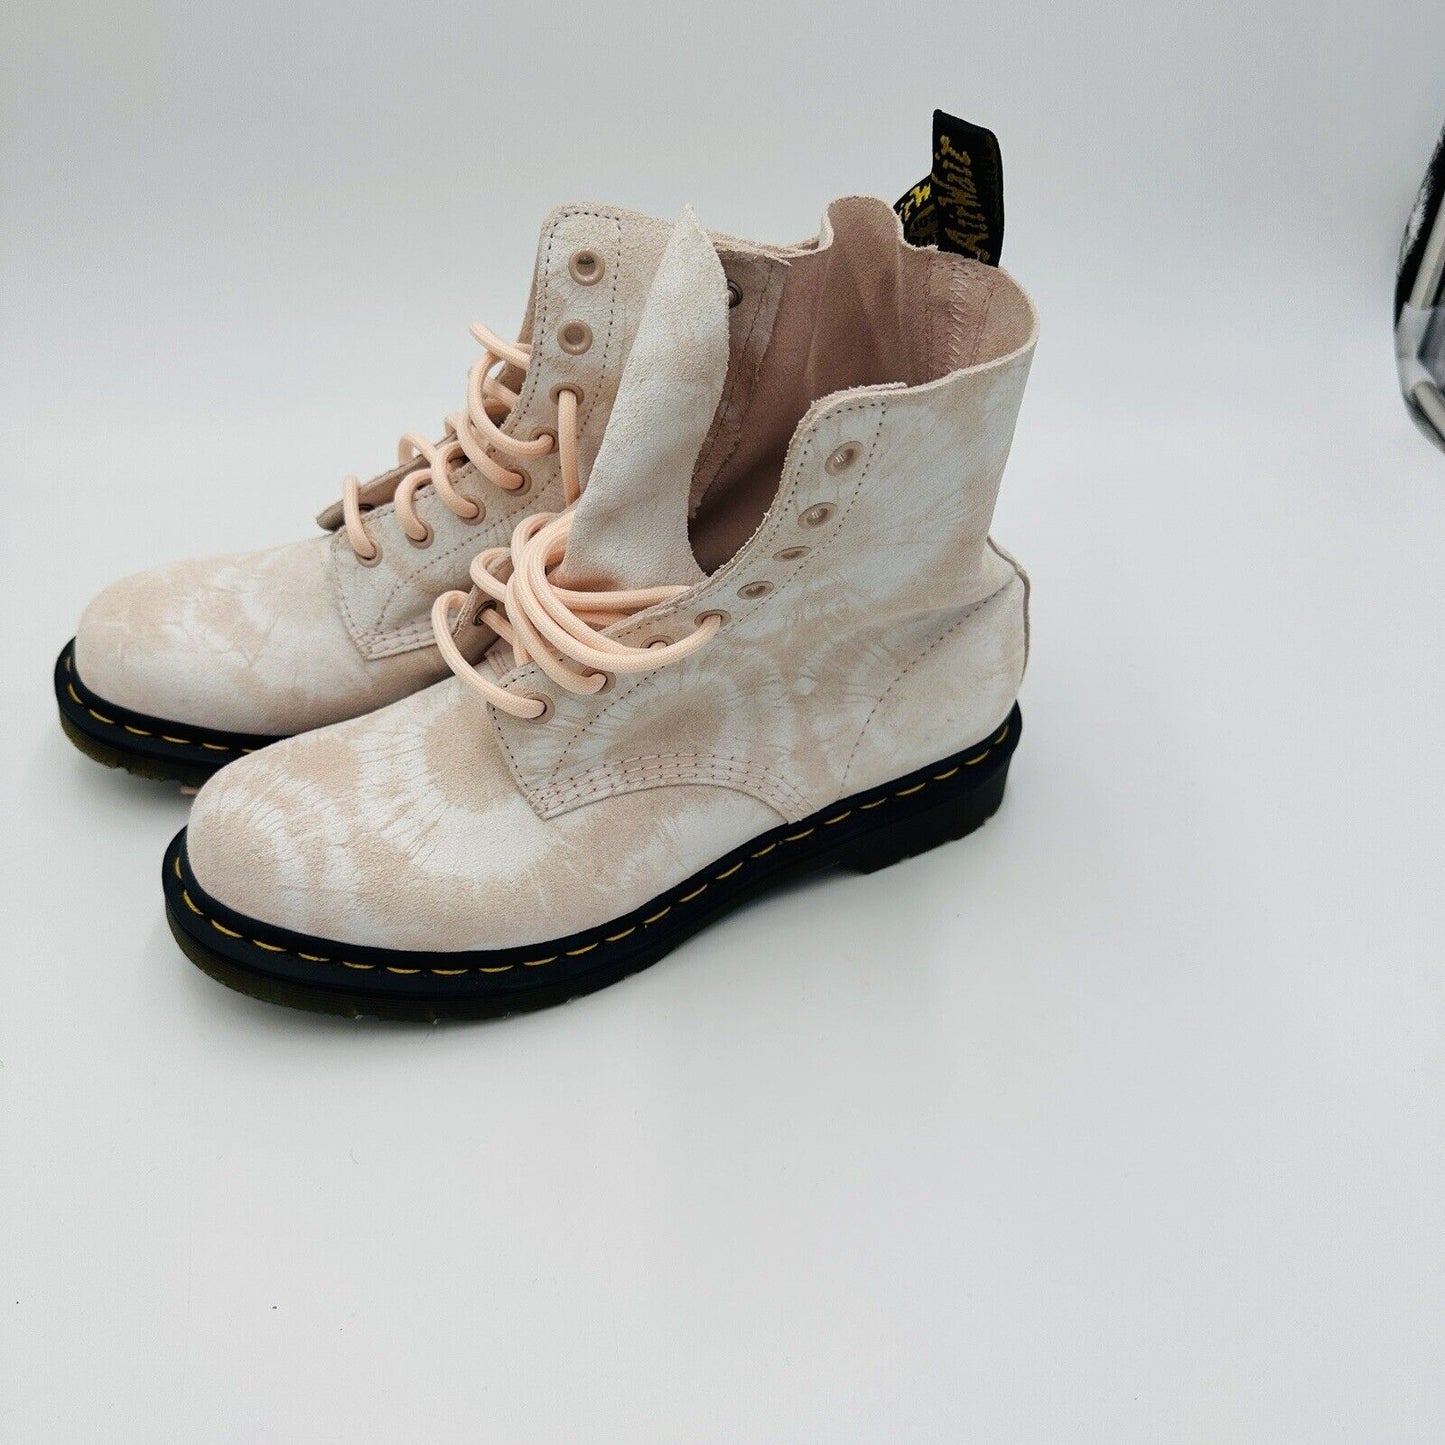 Dr Martens Women's Size 10 Tie Dye Boots Leather Pink White Shoes